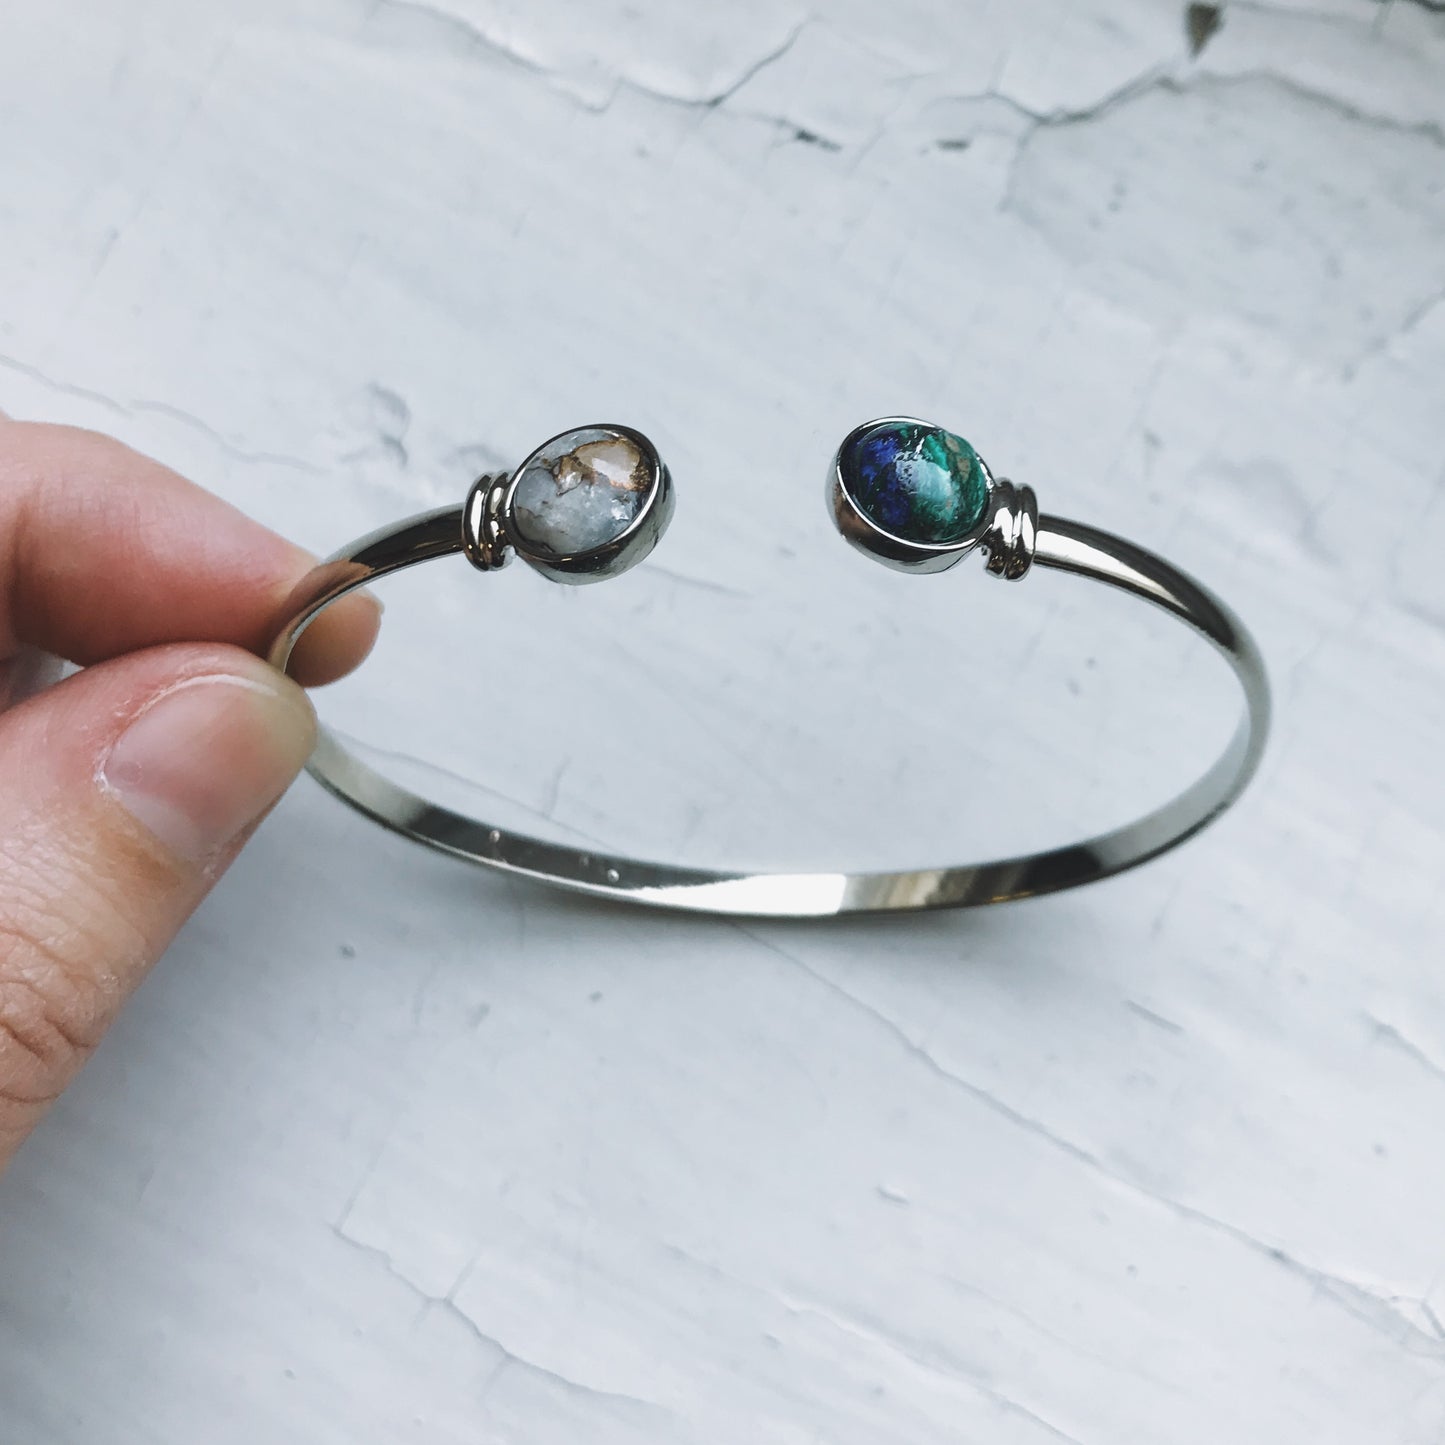 Earth and Moon Cuff Bracelet with Natural Stones Bracelet Yugen Handmade Silver Tone  